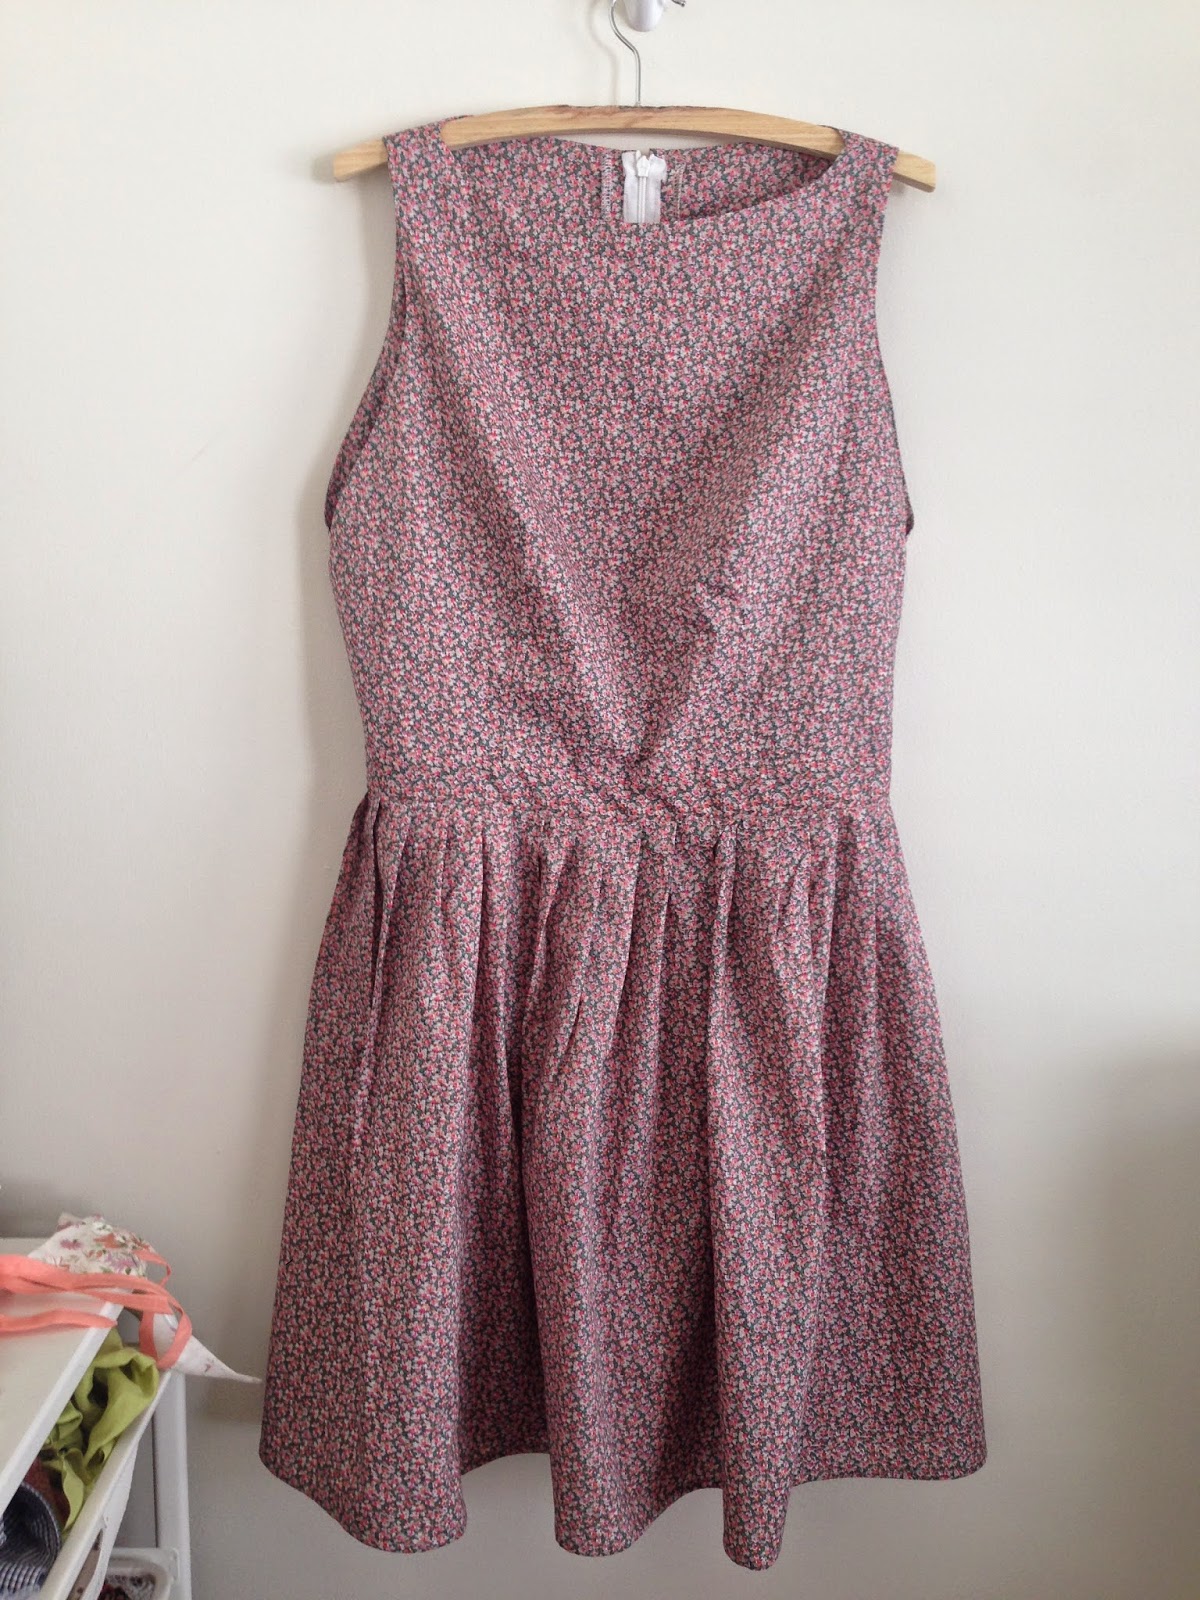 Sewn By Elizabeth: Vogue 8901 Or The Dress With Room For Your Cat